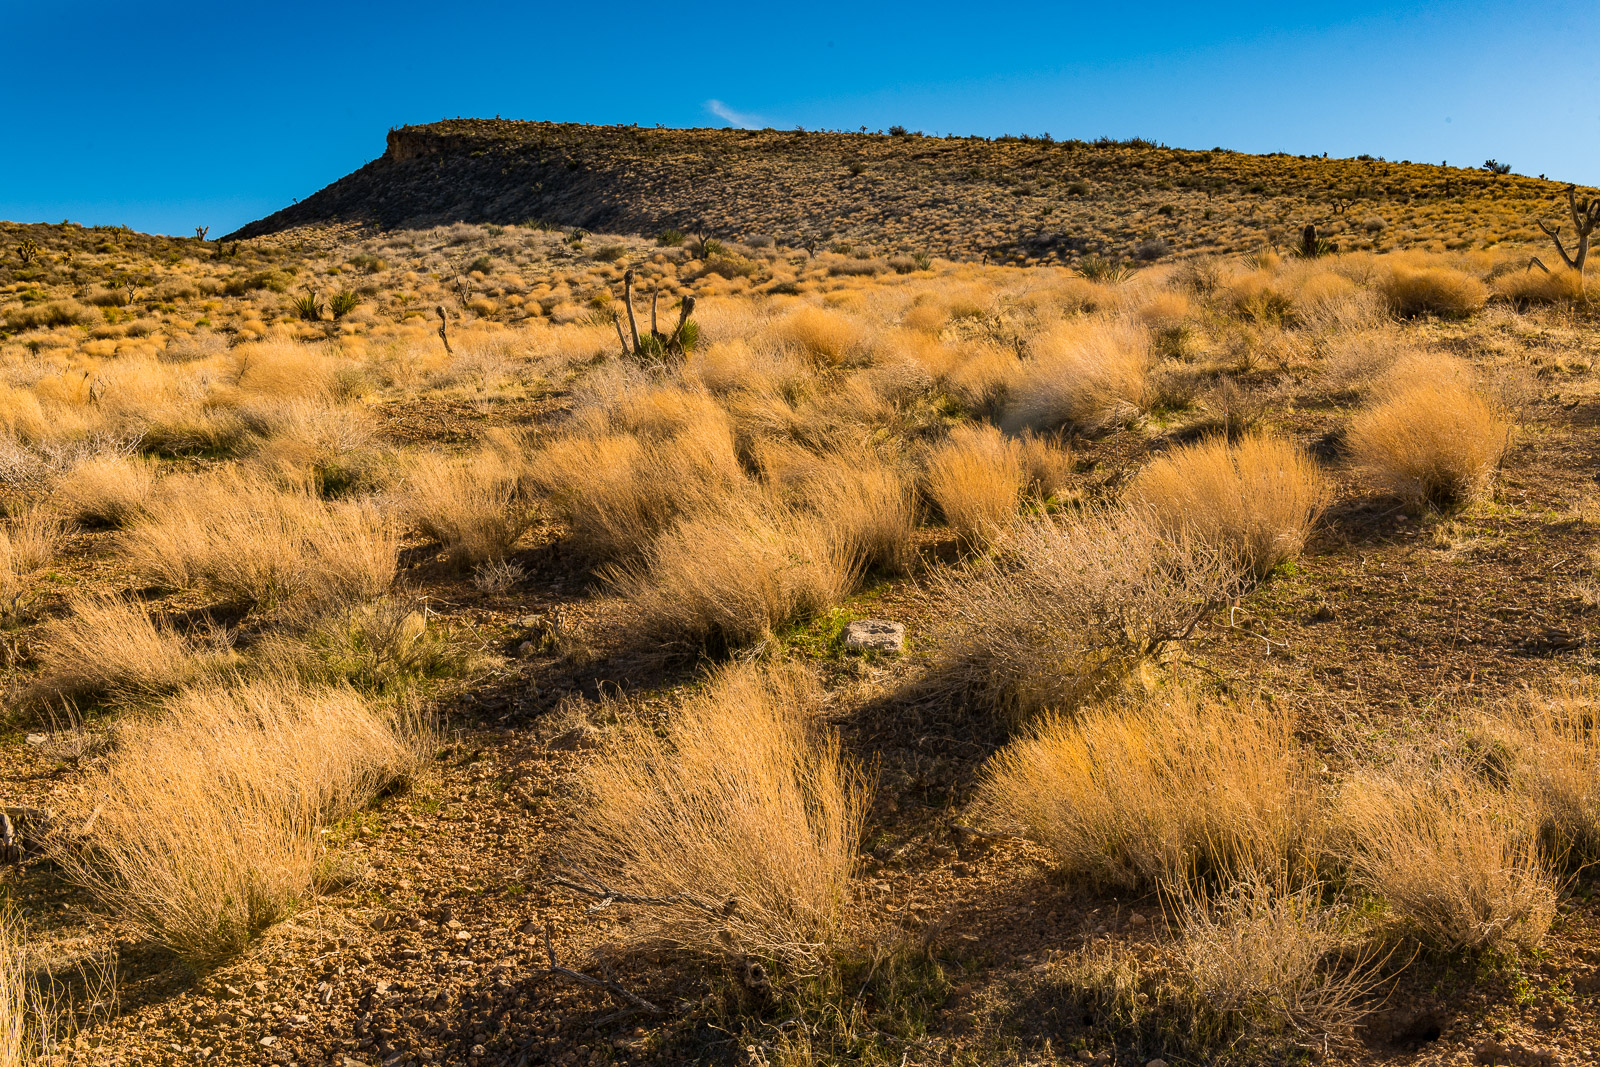 A patch of golden brush catches afternoon light on Bureau of Land Management land near Las Vegas, Nevada.